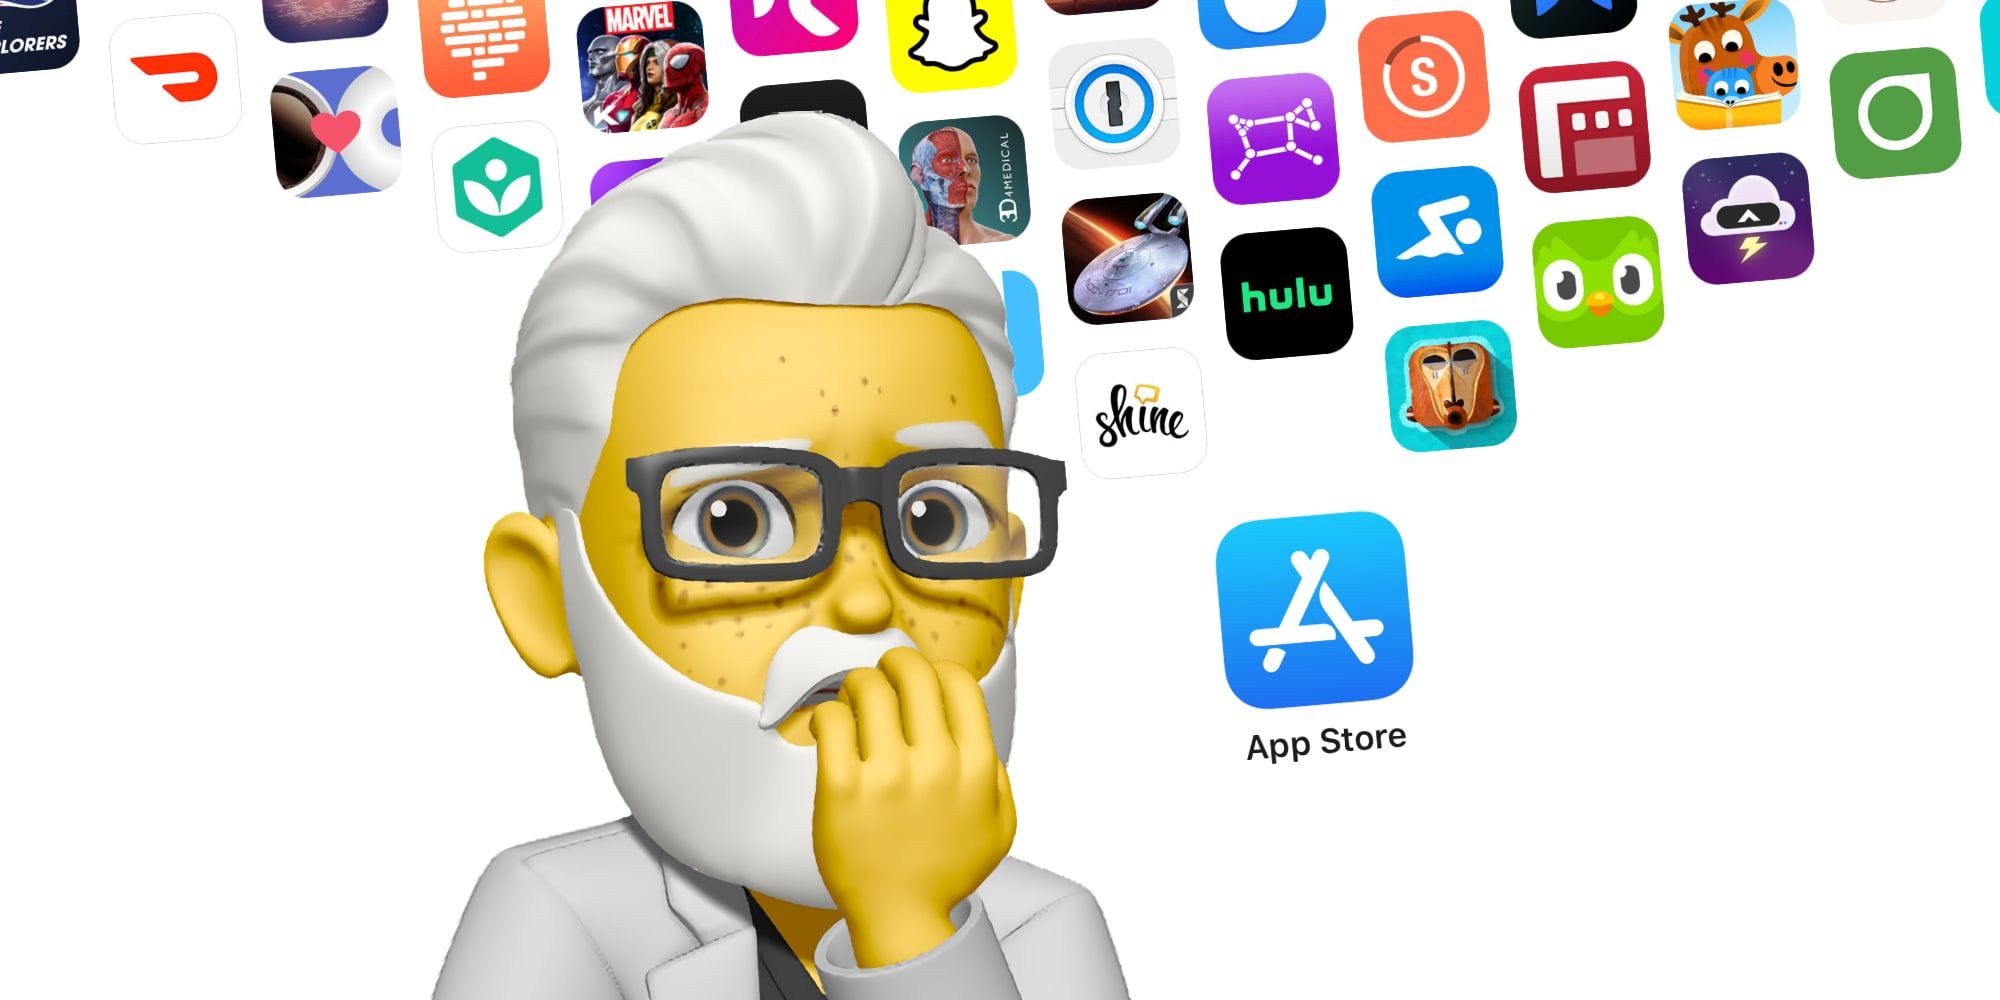 Apple Memoi Old Man With A Grey Beard (Old App) Worried Over App Store